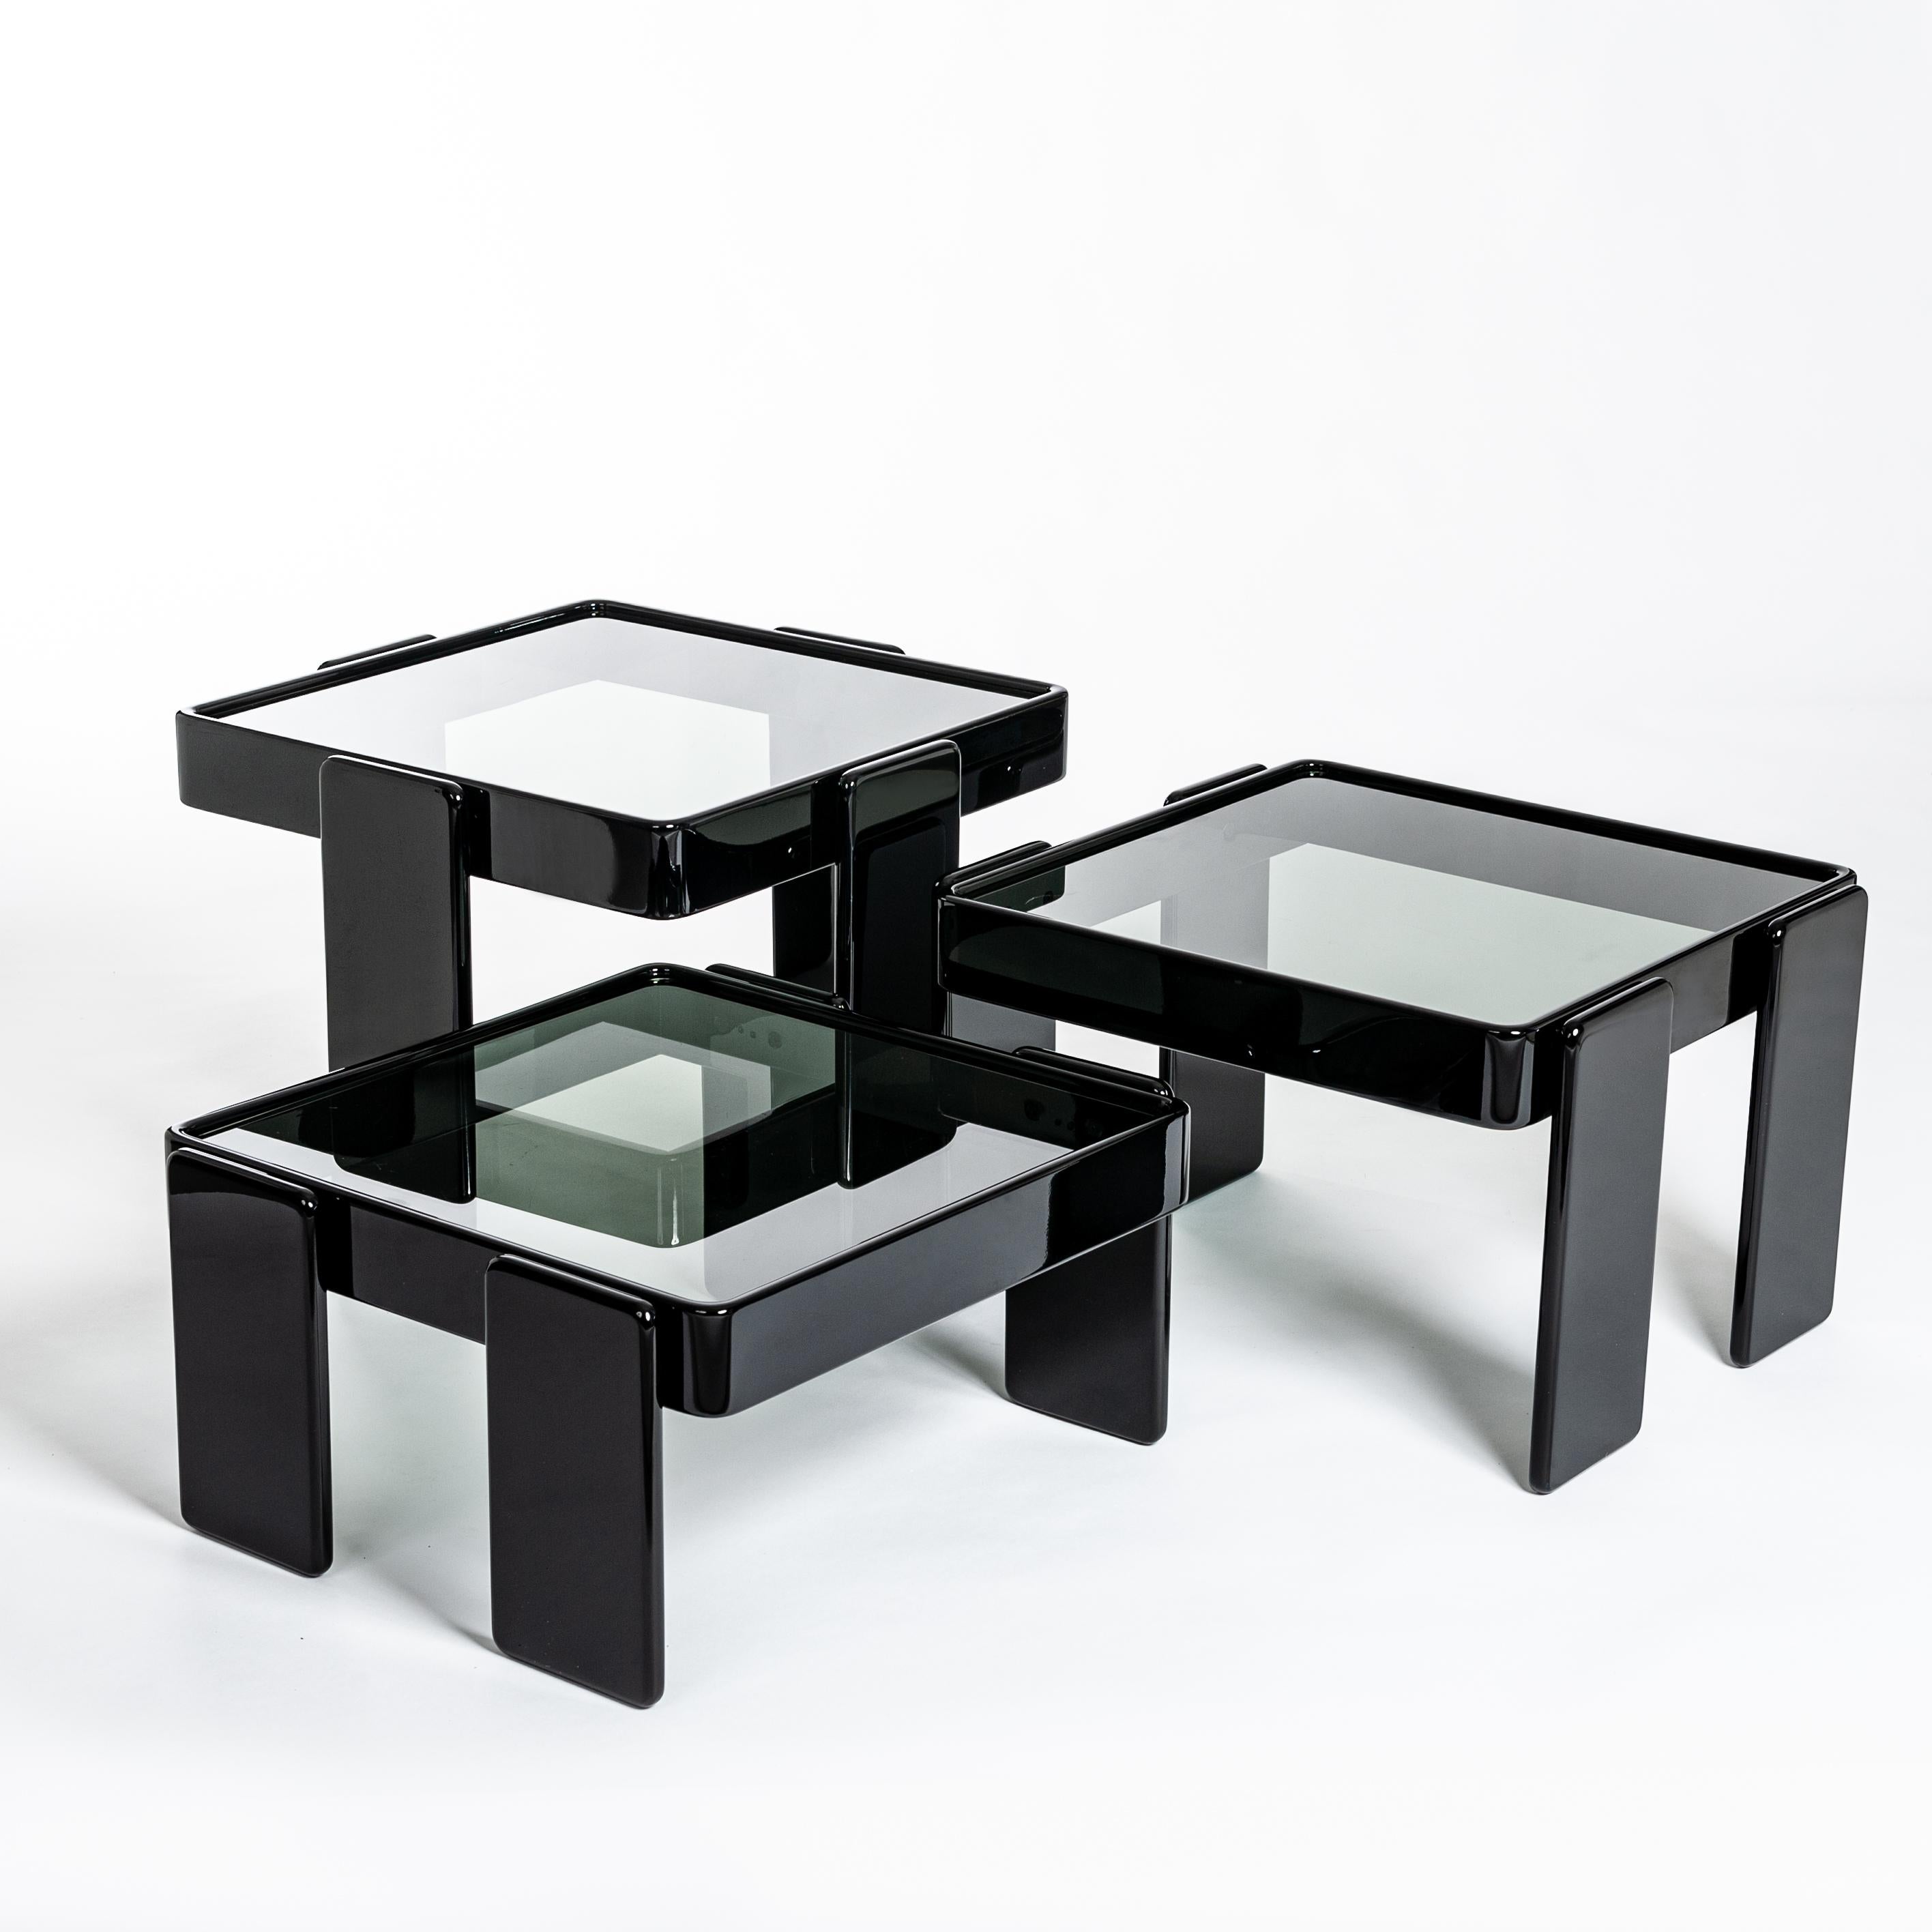 Set of three stacking tables by Gianfranco Frattini, Italy, 1970s.
The wood was completely re-lacquered due to the worn surface and is now in perfect condition.
Green original table tops in glass go perfectly with the black high-gloss